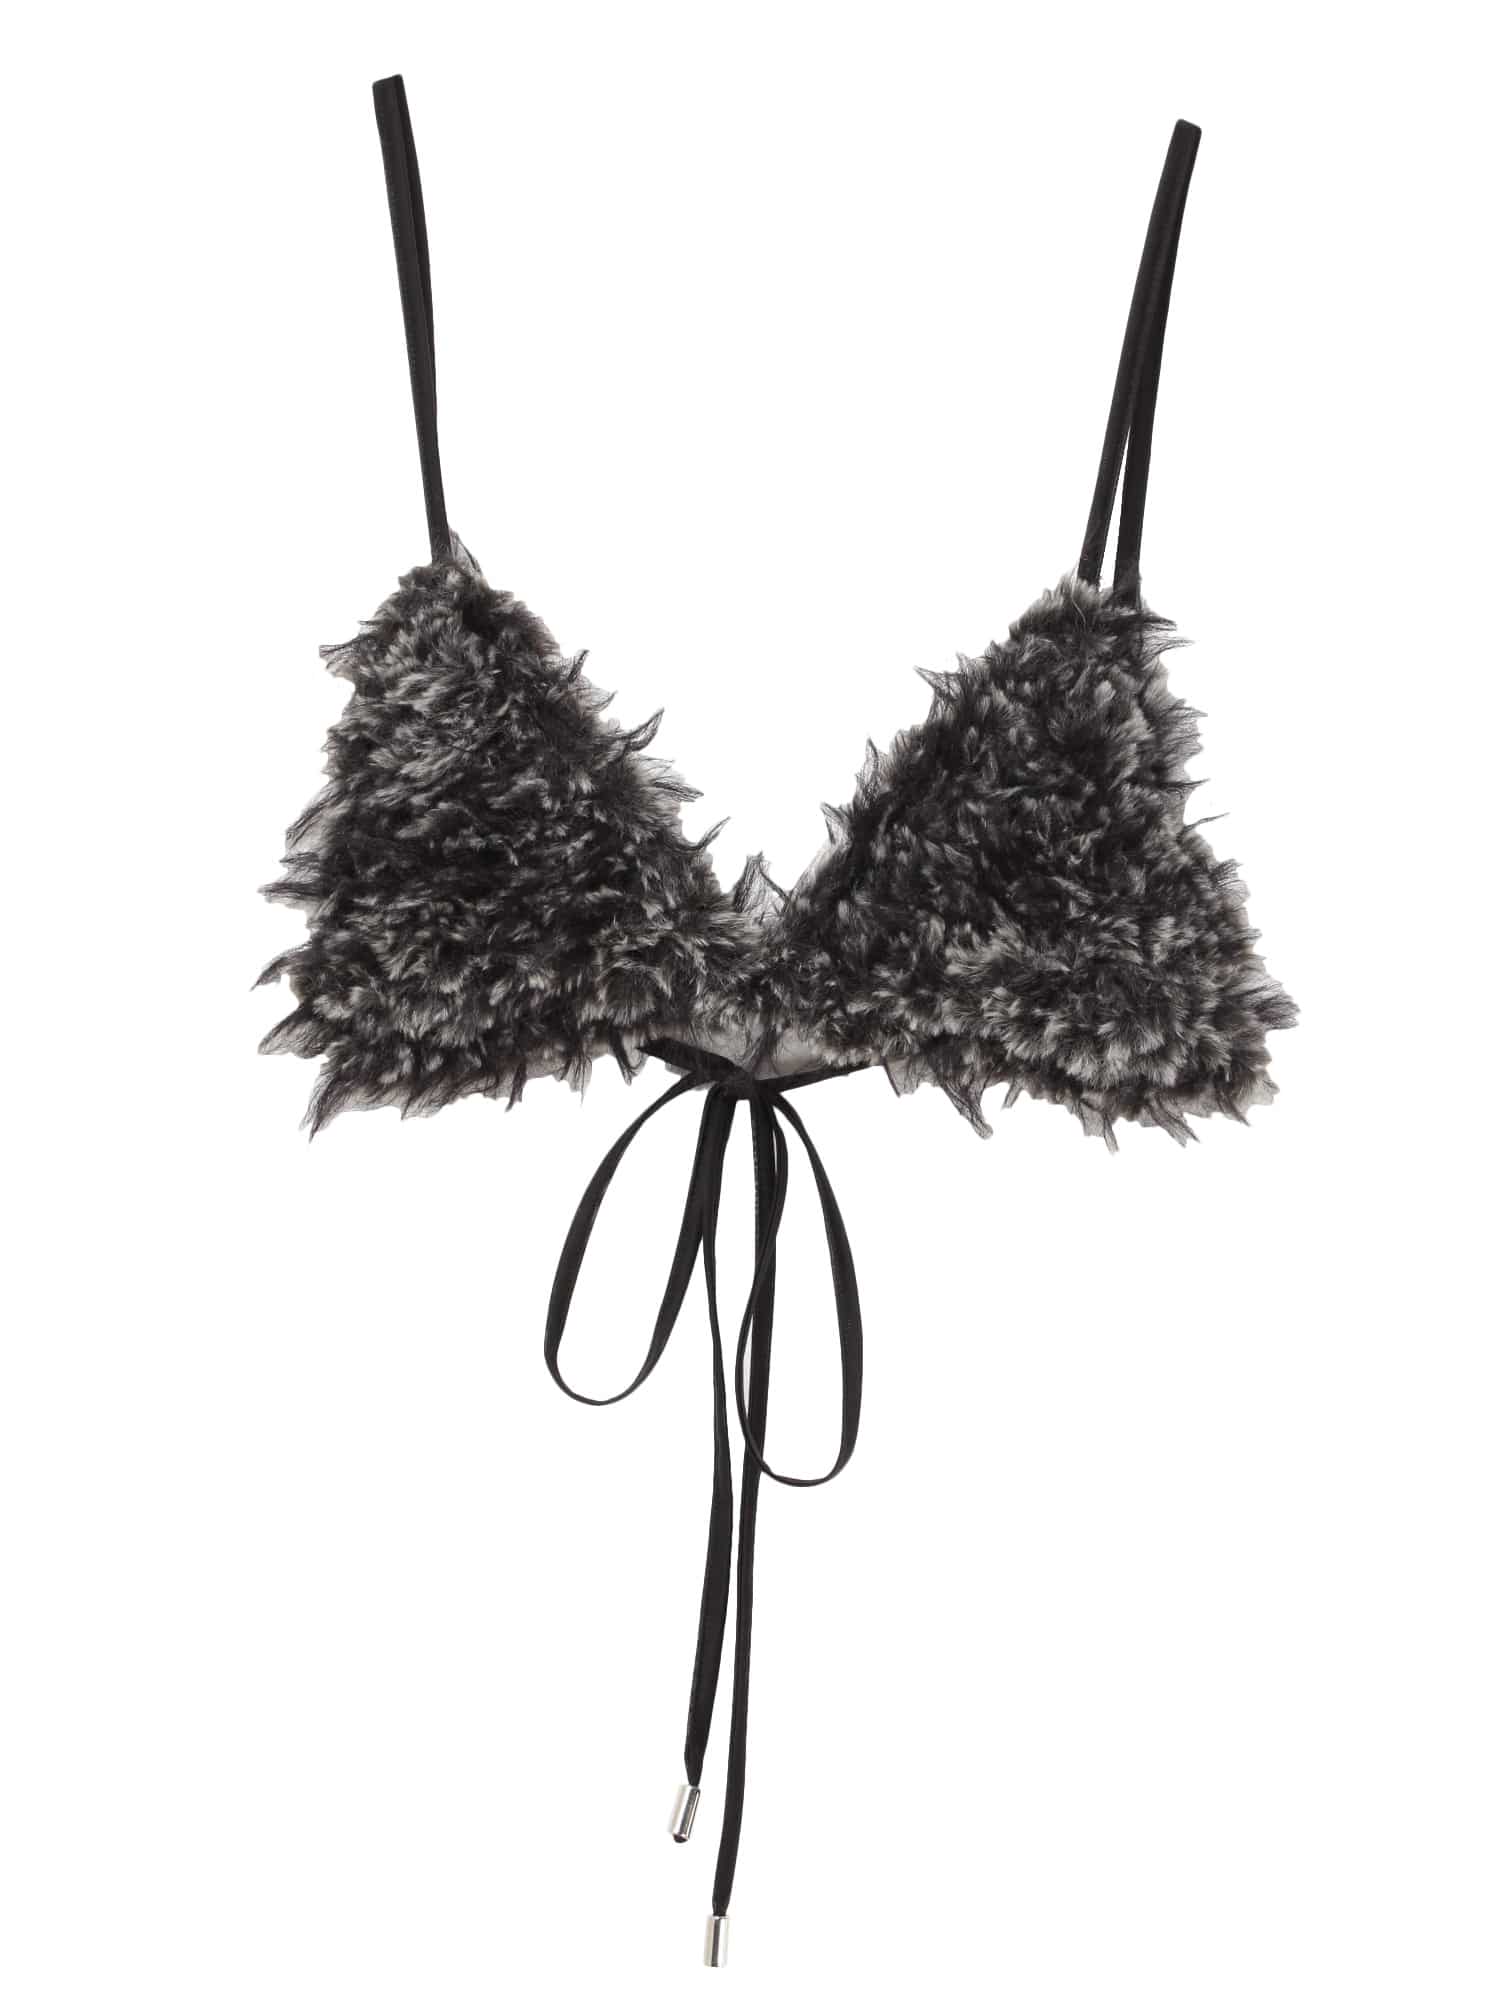 Wendy Bird Bras are soft, seamless and designed for tweens and